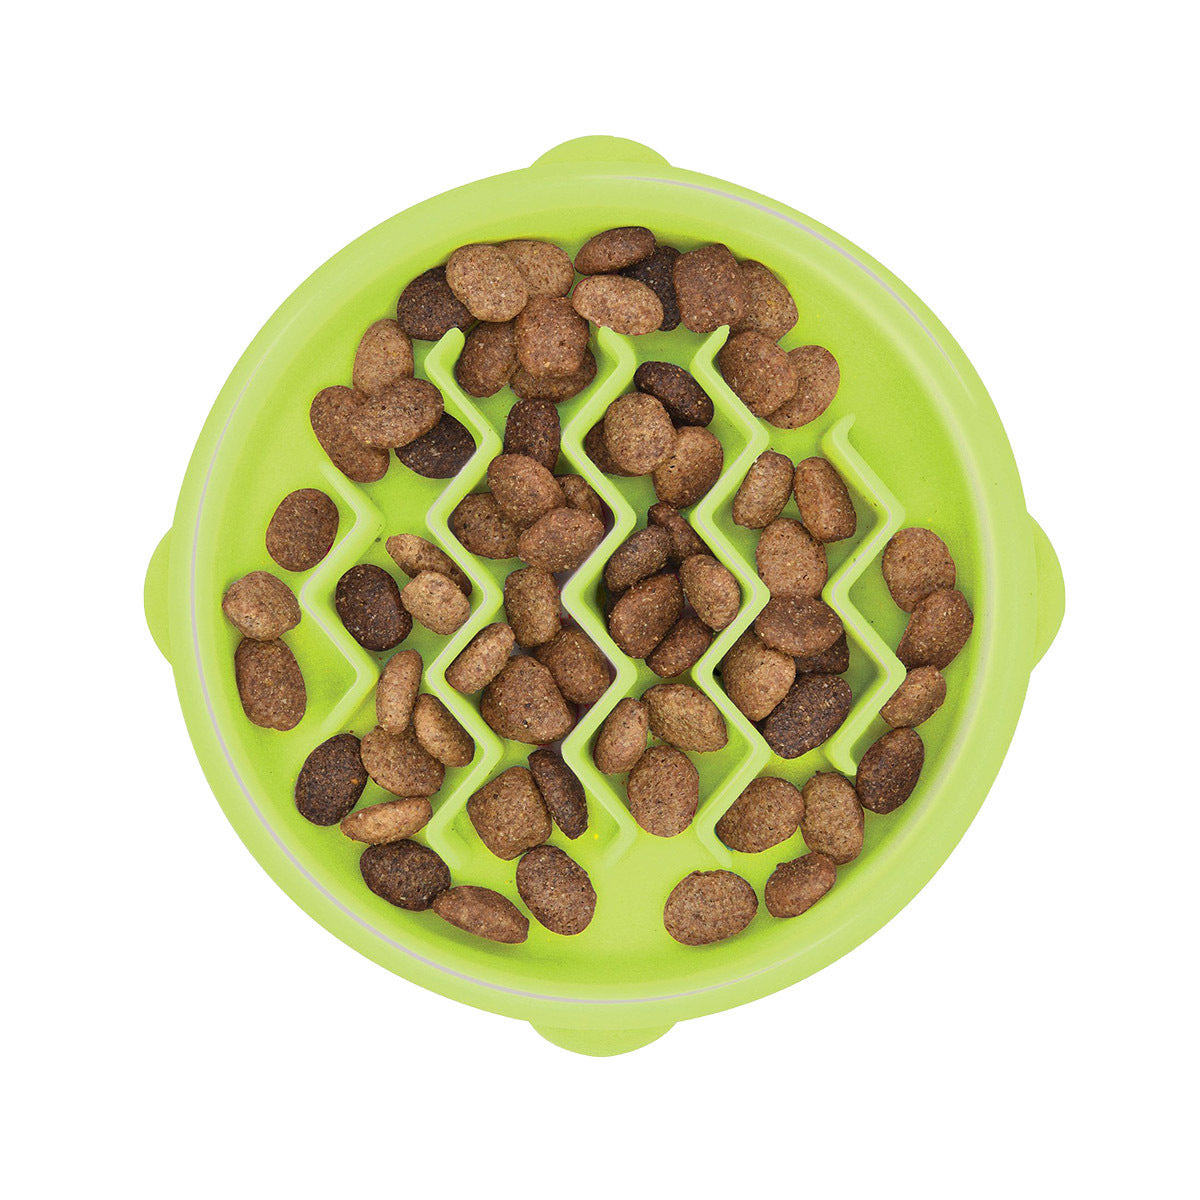 Cat Fun Slow Feeder Wave Bowl - Green - X Small by Petstages